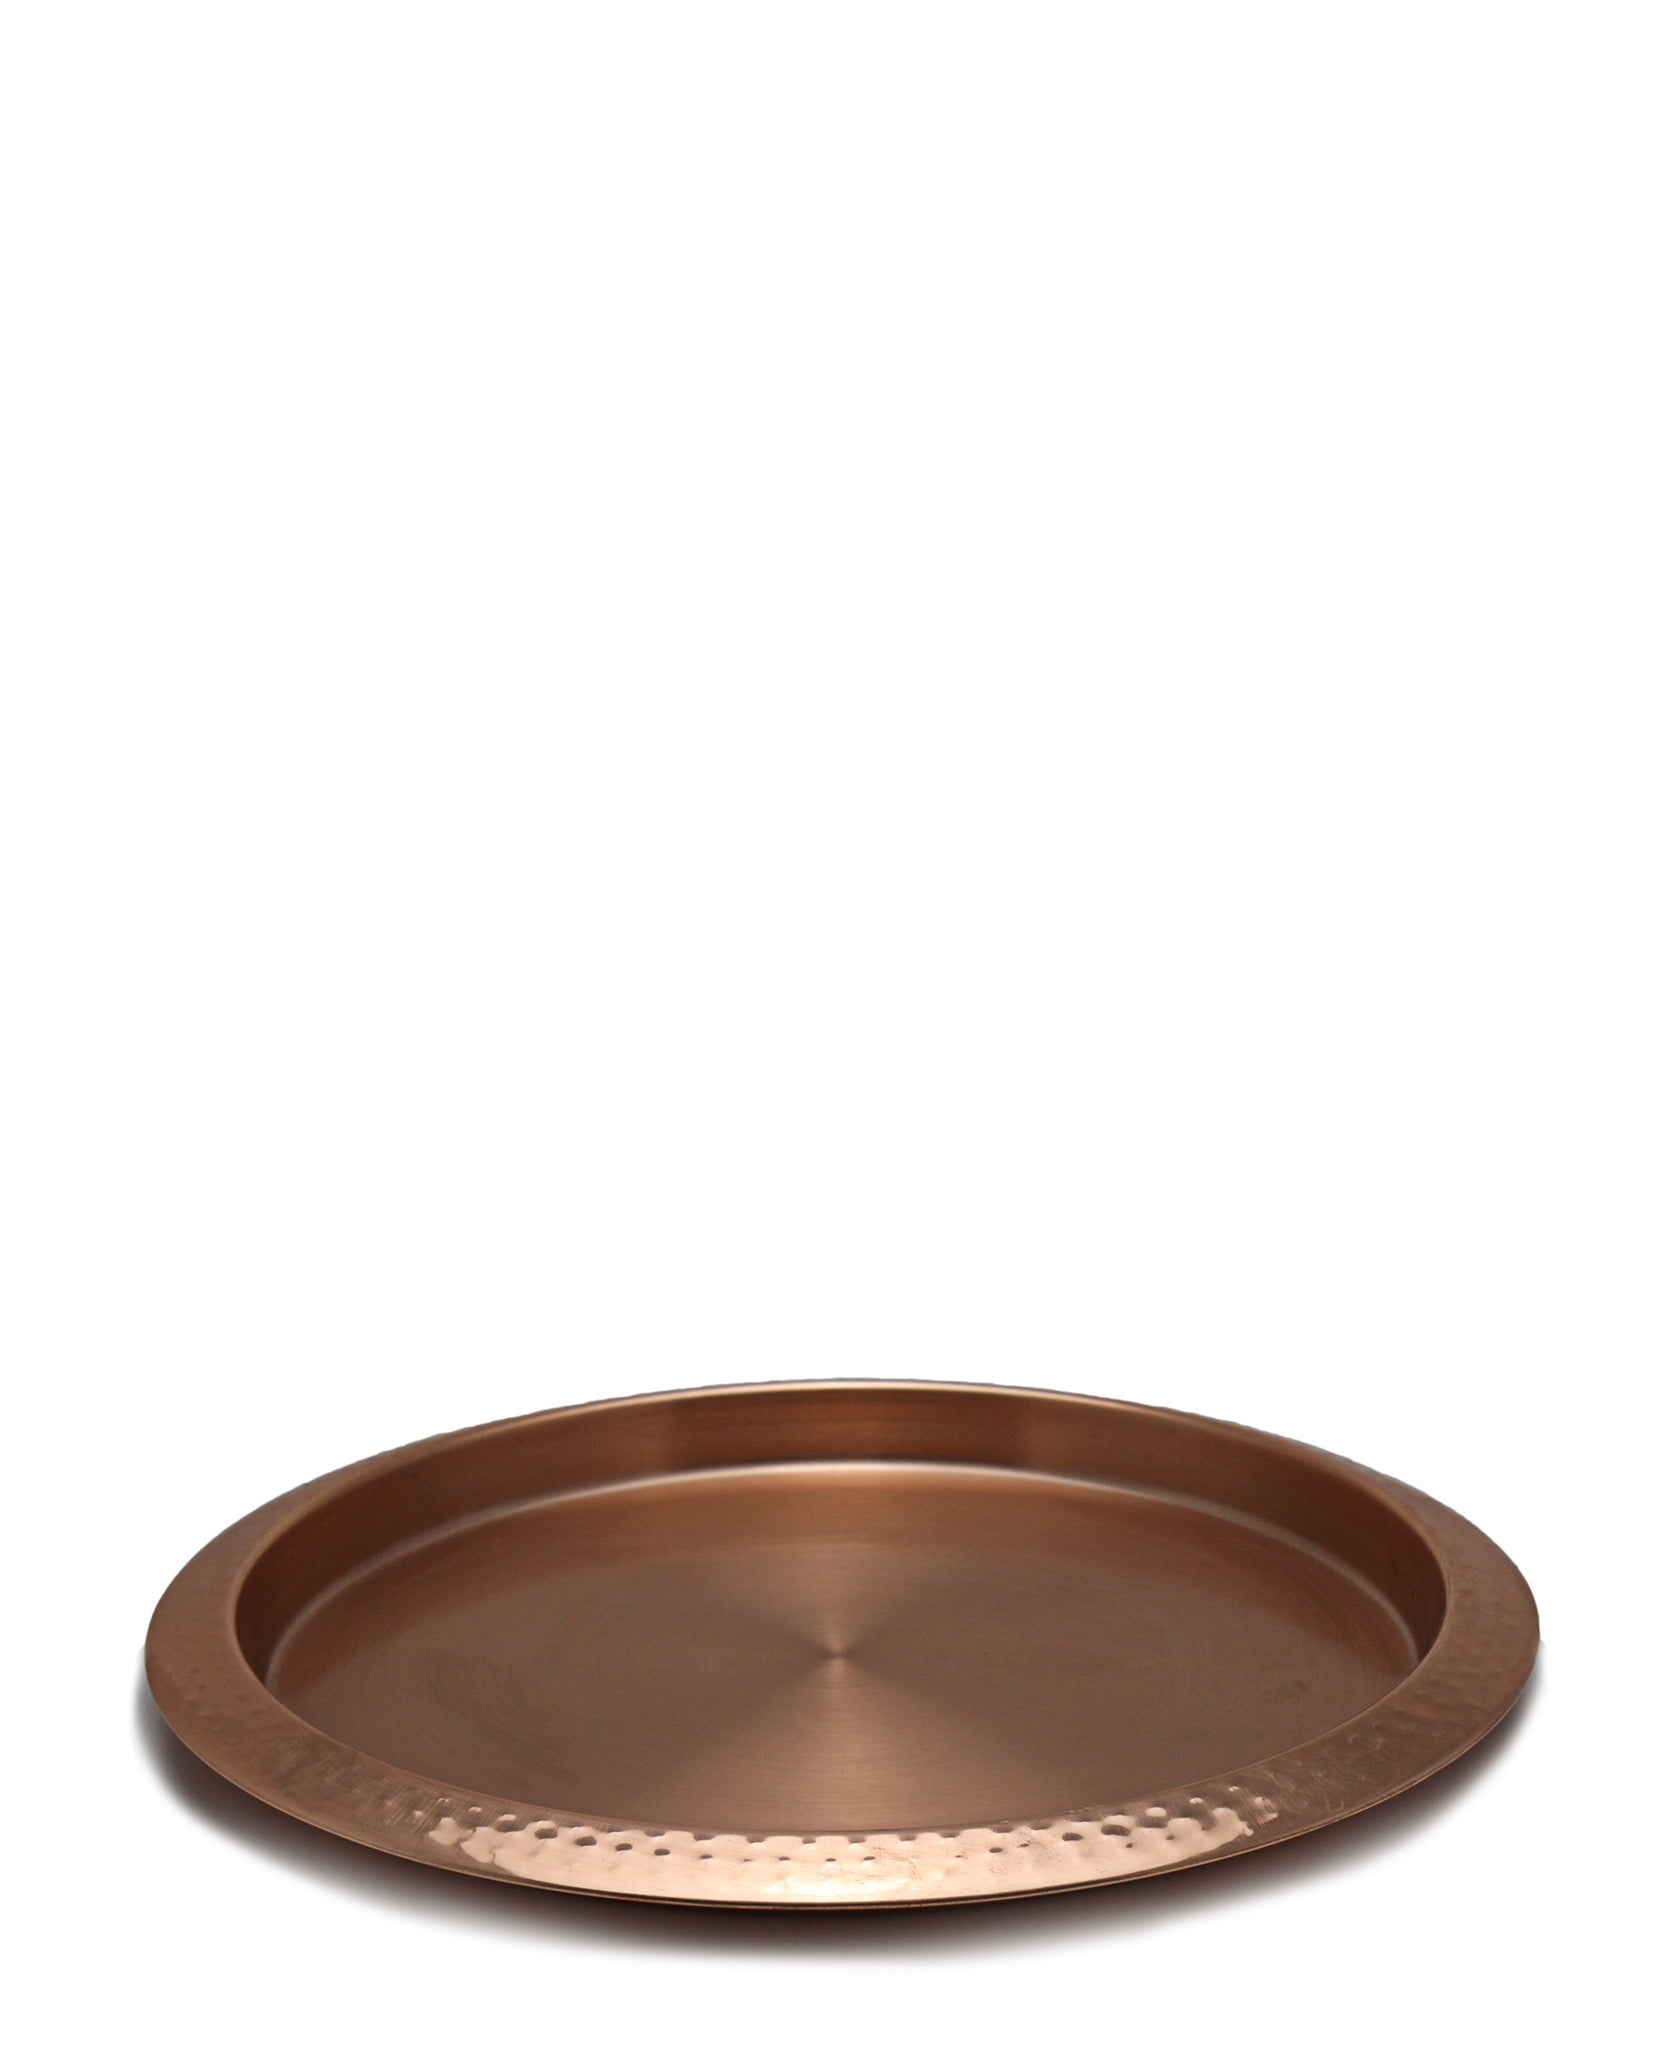 Kitchen Life Hammered Serving Tray - Copper